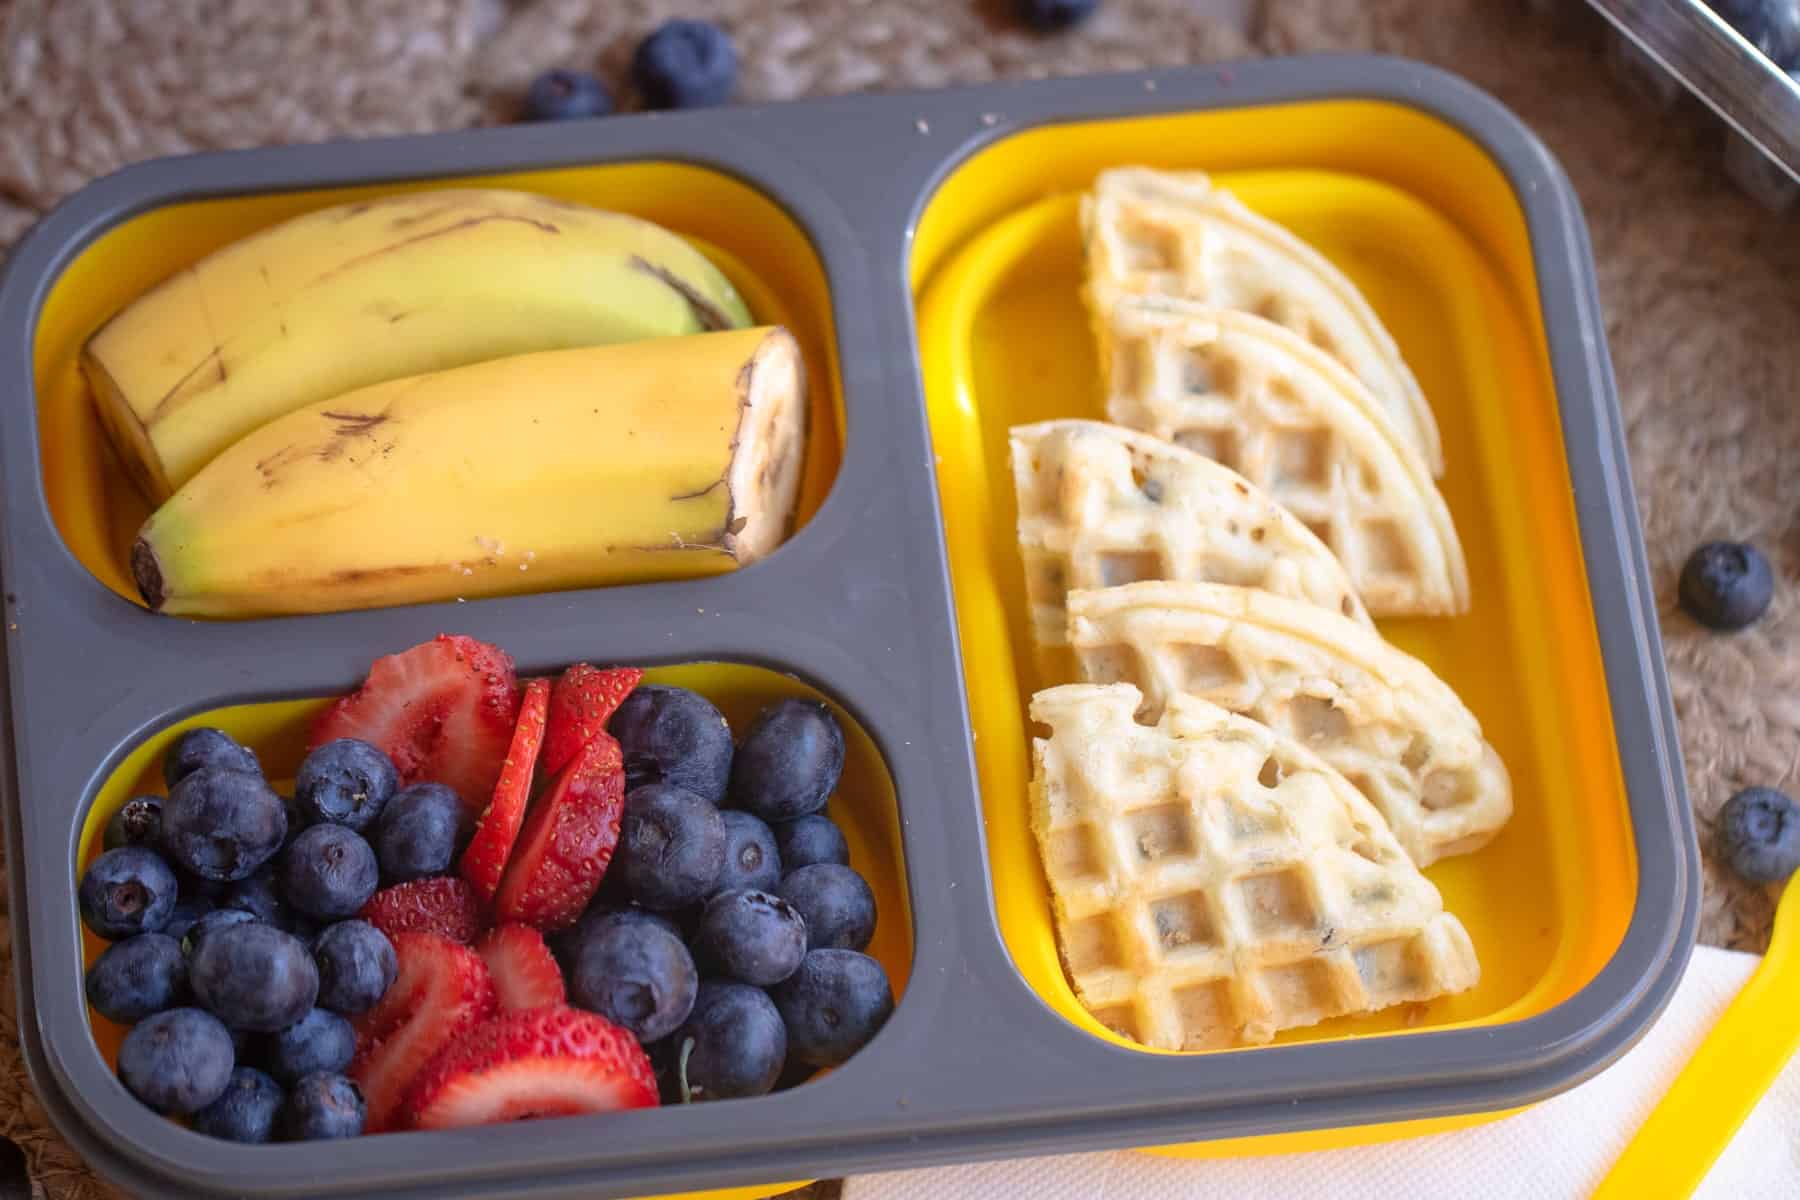 How To Keep Fruit Fresh In Lunch Box